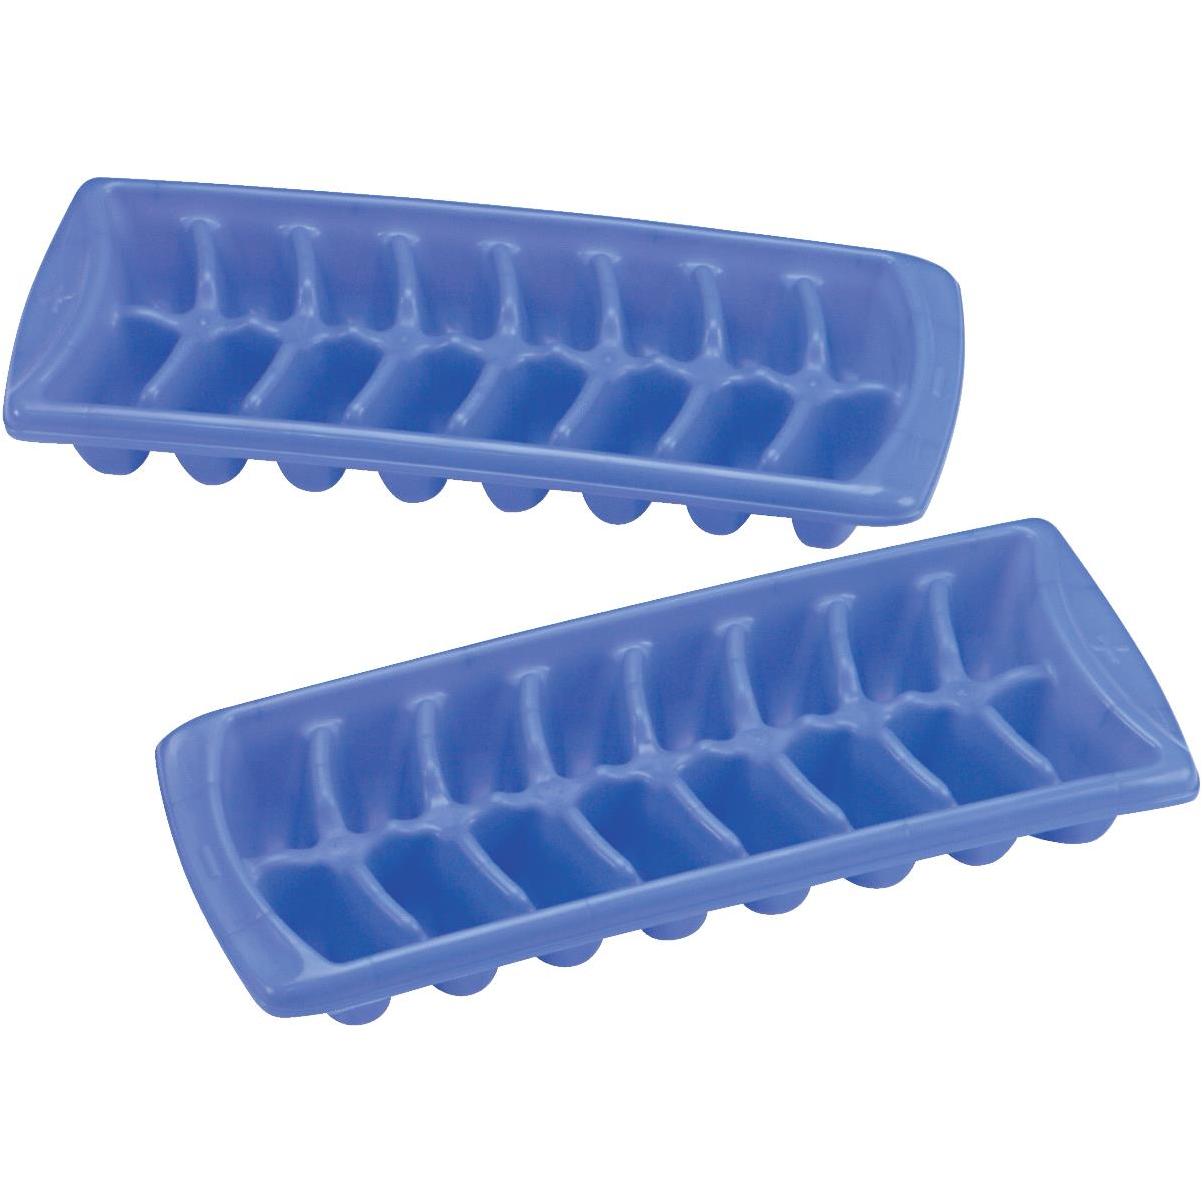 Rubbermaid Easy Release Flexible Dual-Material Ice Cube Tray